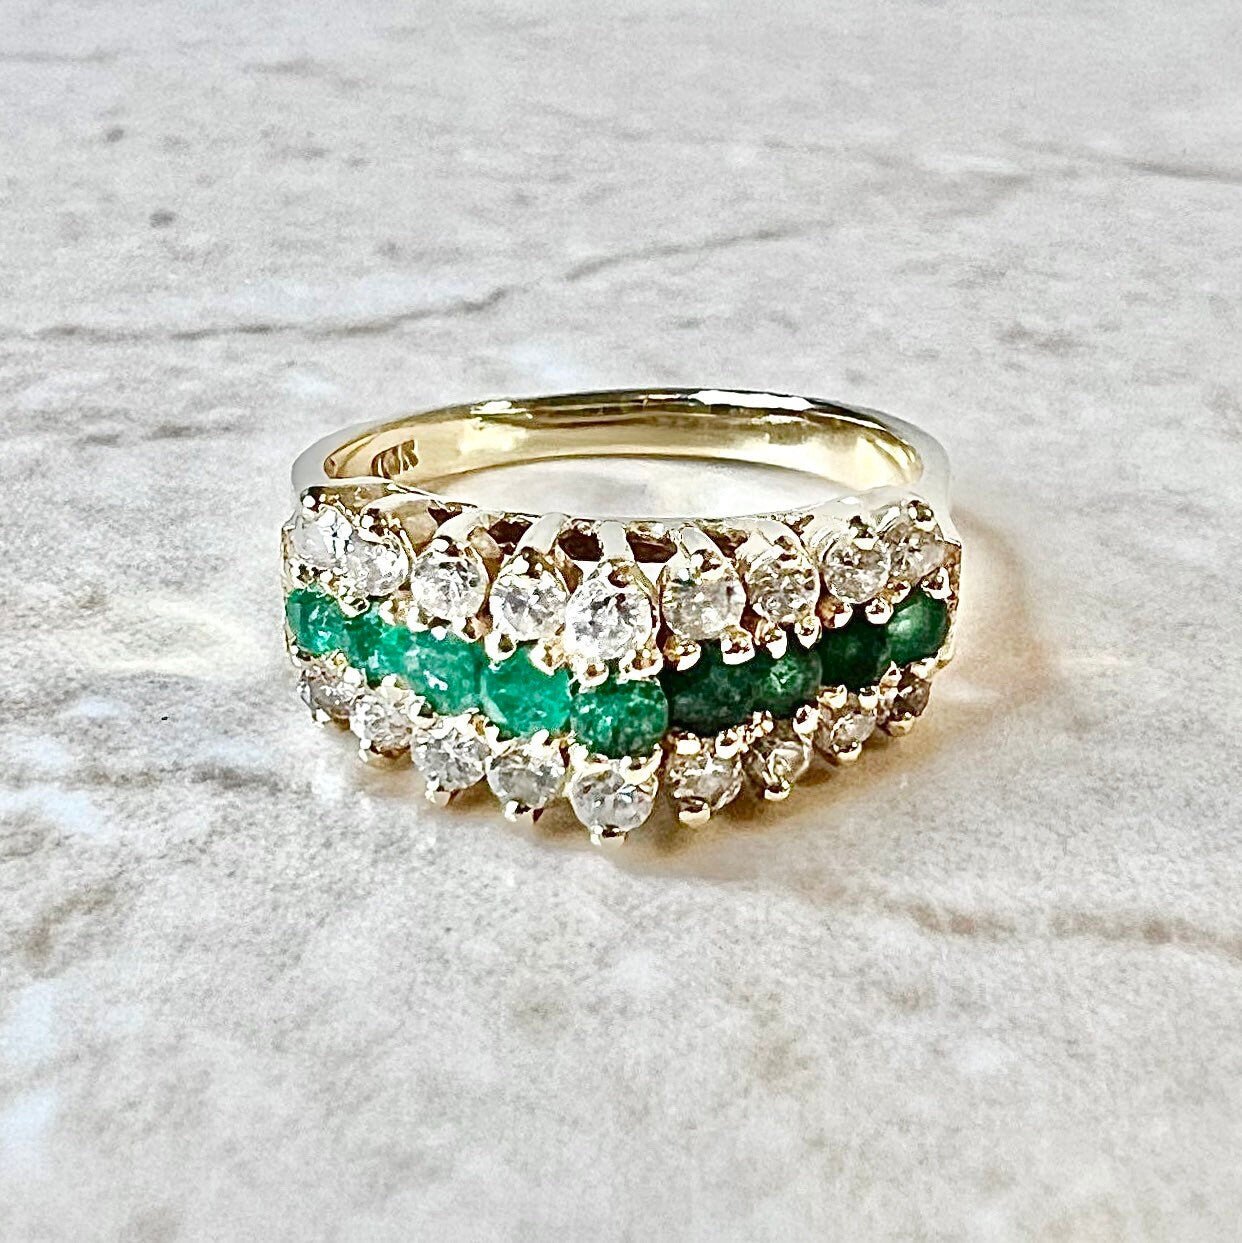 Vintage 14K Natural Emerald Band Ring - Yellow Gold Emerald Ring - Genuine Emerald Ring - Best Gifts For Her - April May Birthstone Gifts